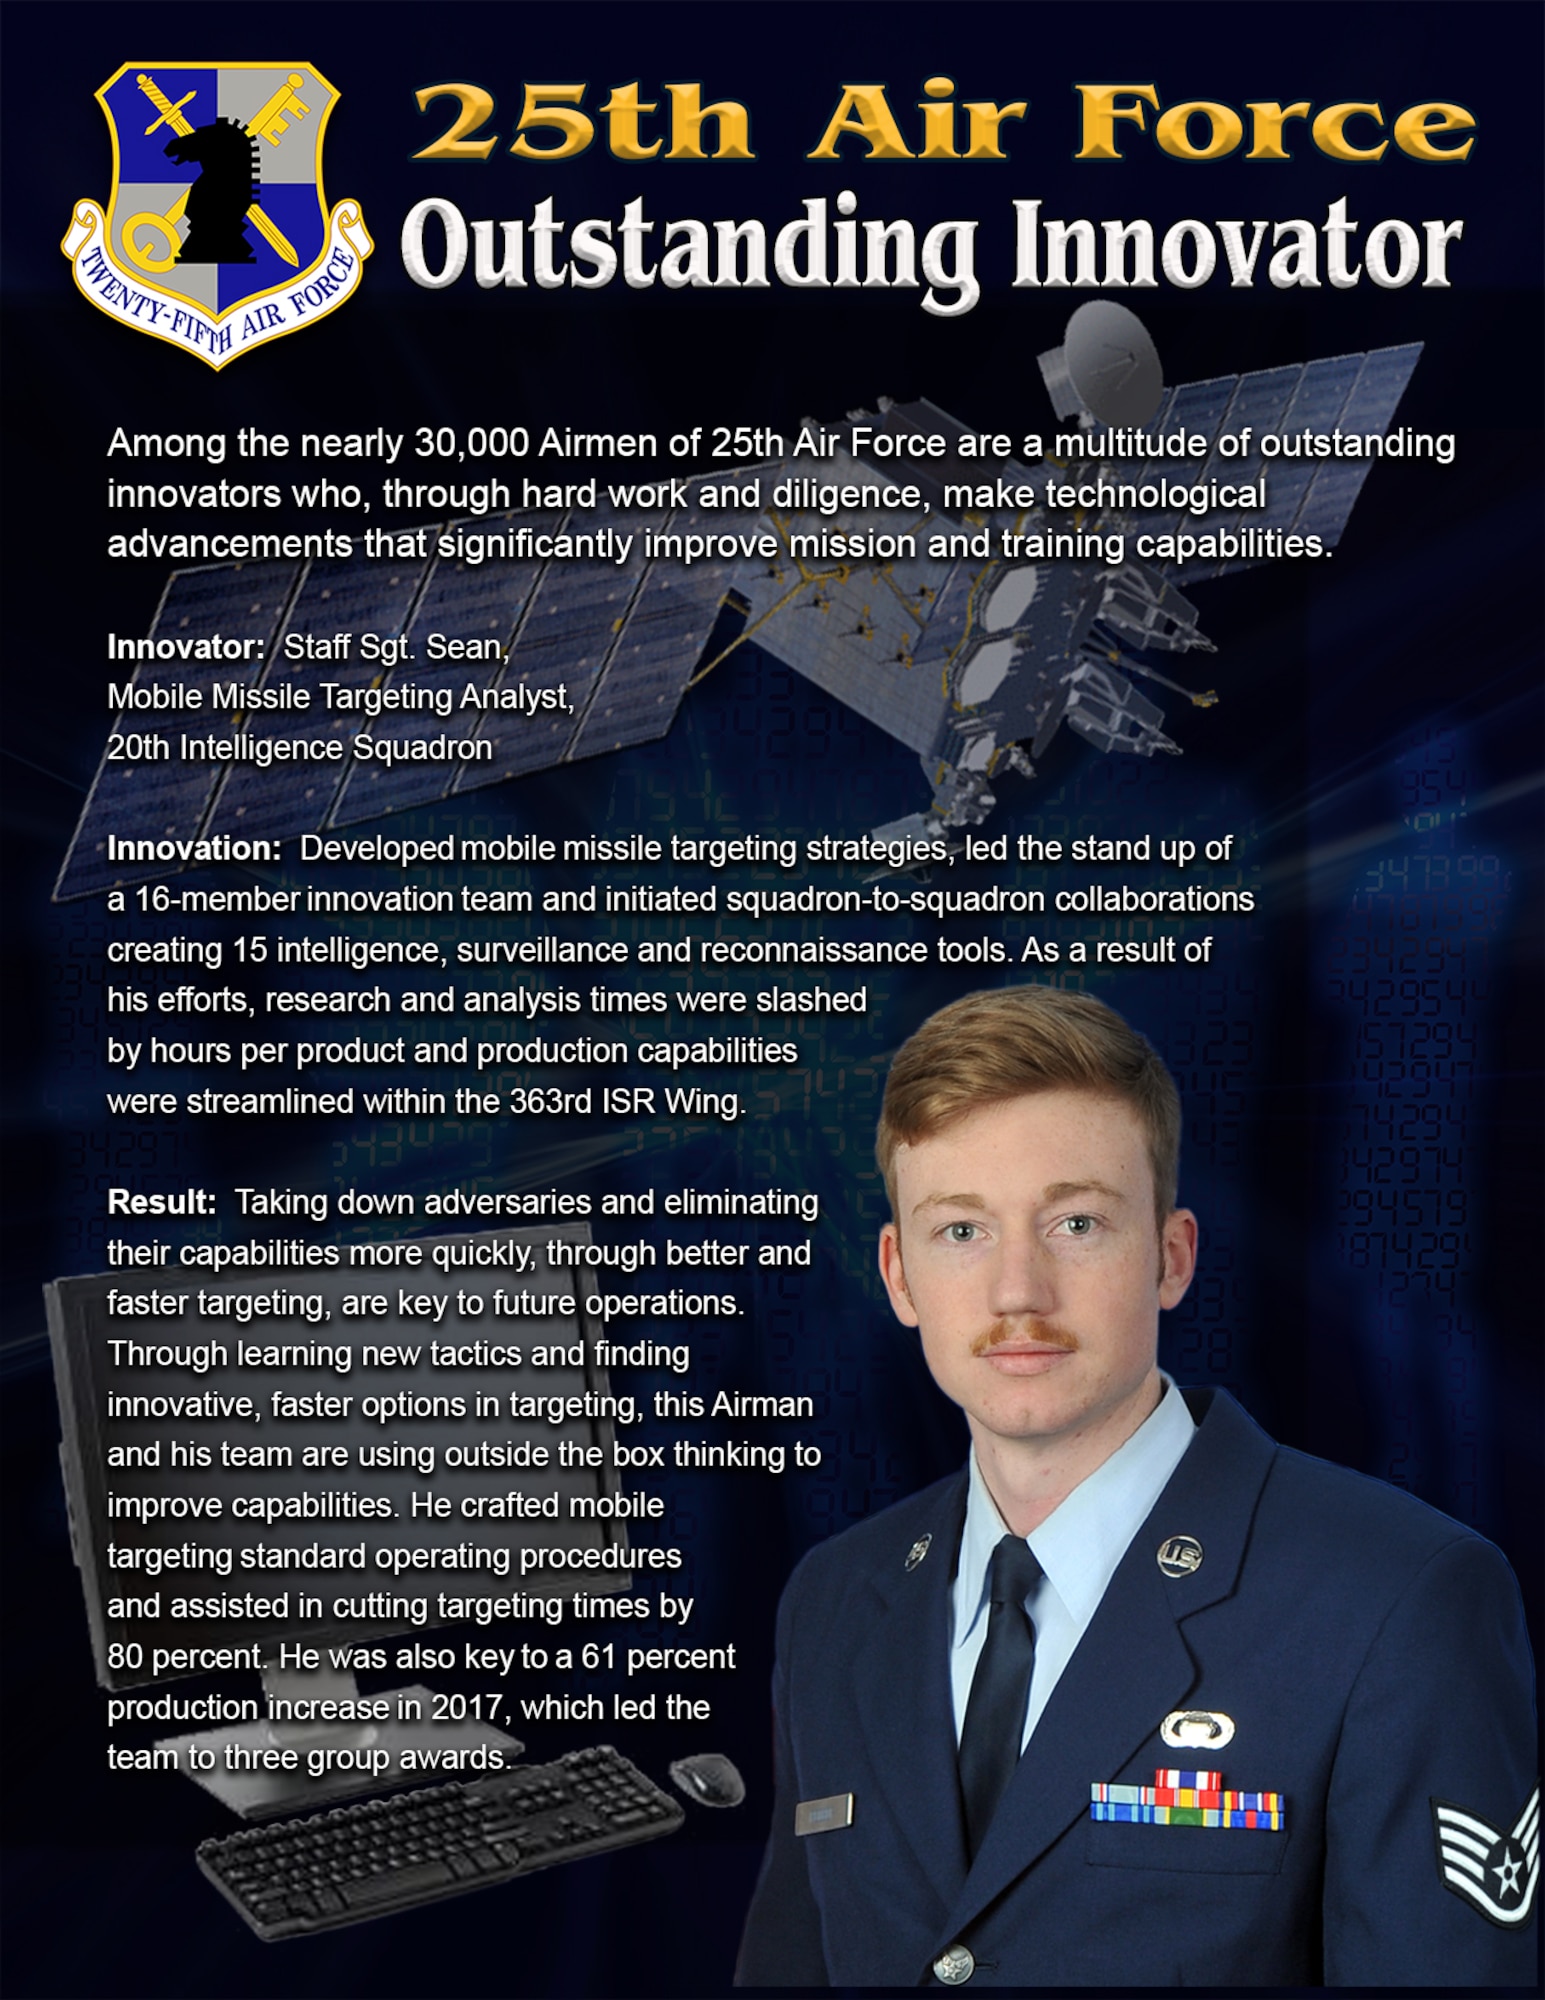 In the field of missile targeting, Staff Sgt. Sean, mobile missile targeting analyst, 20th Intelligence Squadron, is one of the most innovative and motivated members of 25th Air Force.